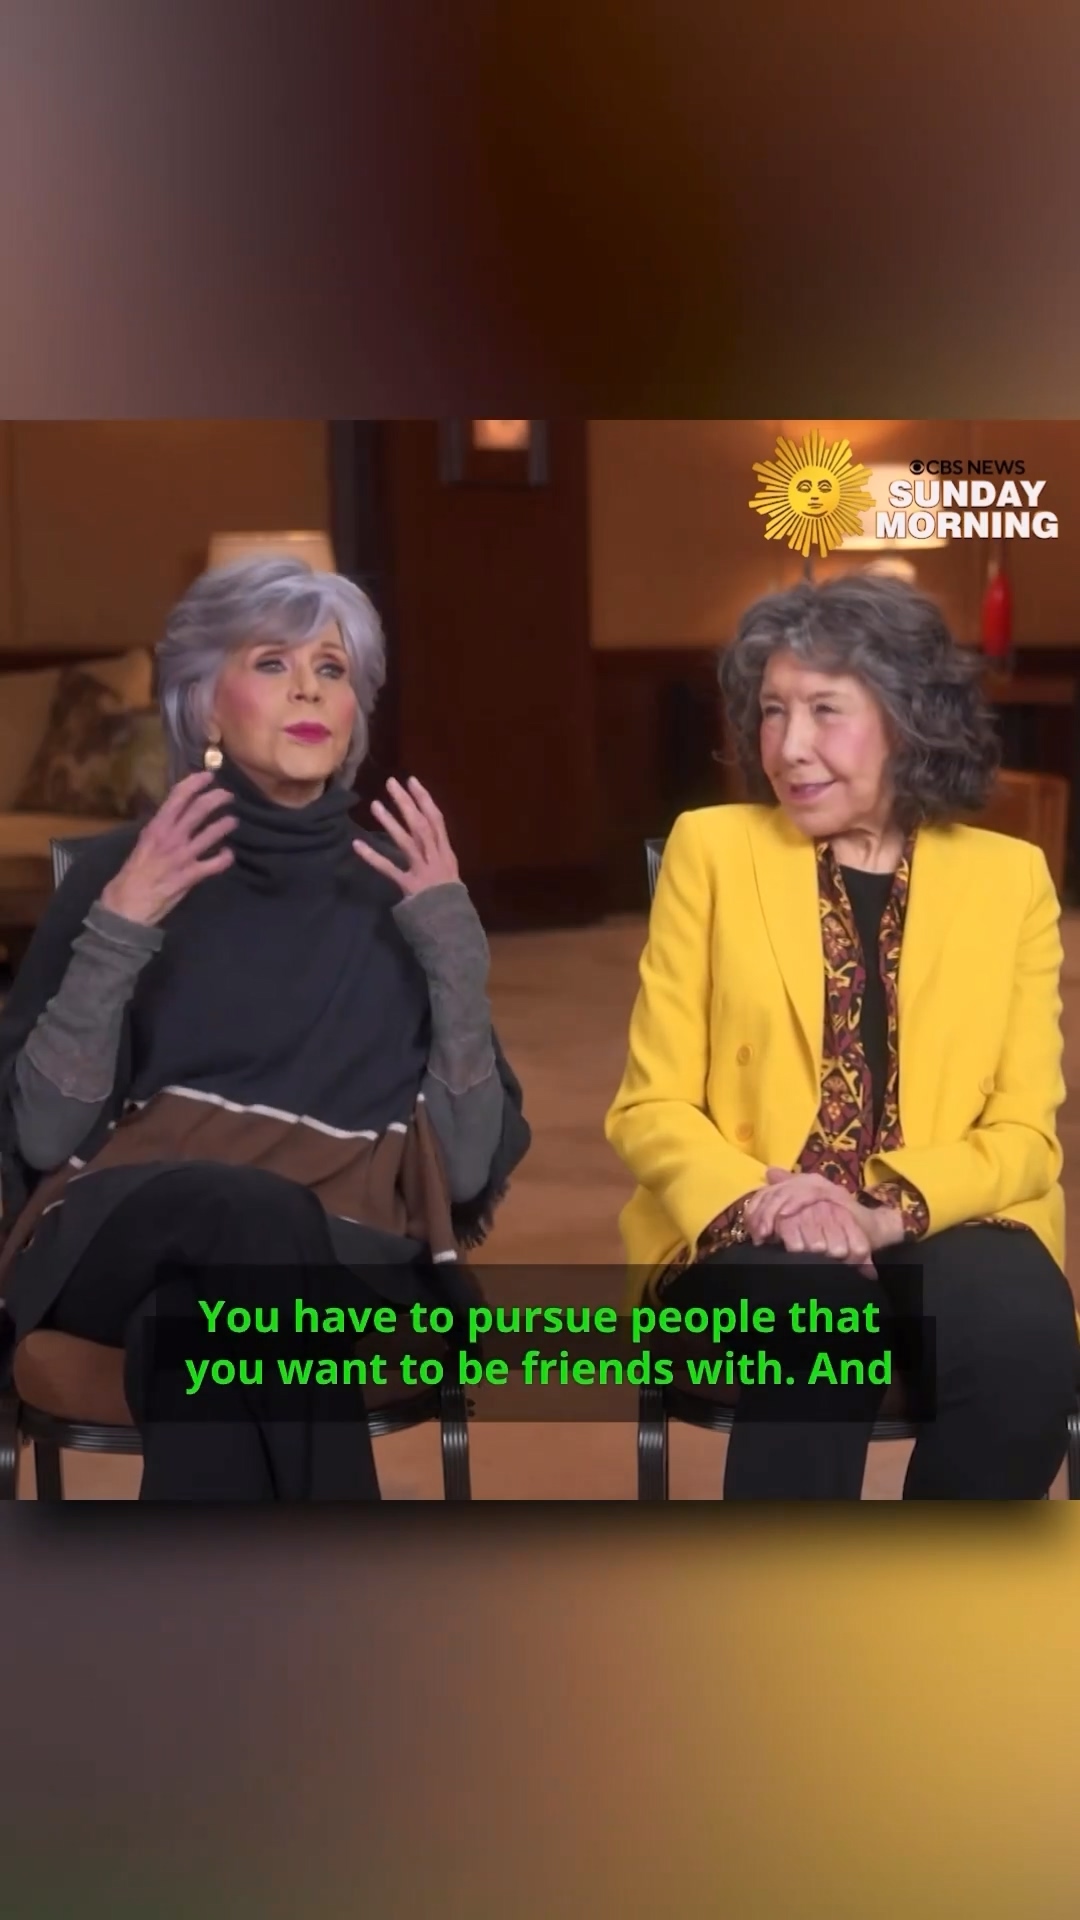 “You have to pursue people you want to be friends with.”@80forbrady actor @janefonda explains how she sought friendships with Sa_20230314_134840.671.jpg